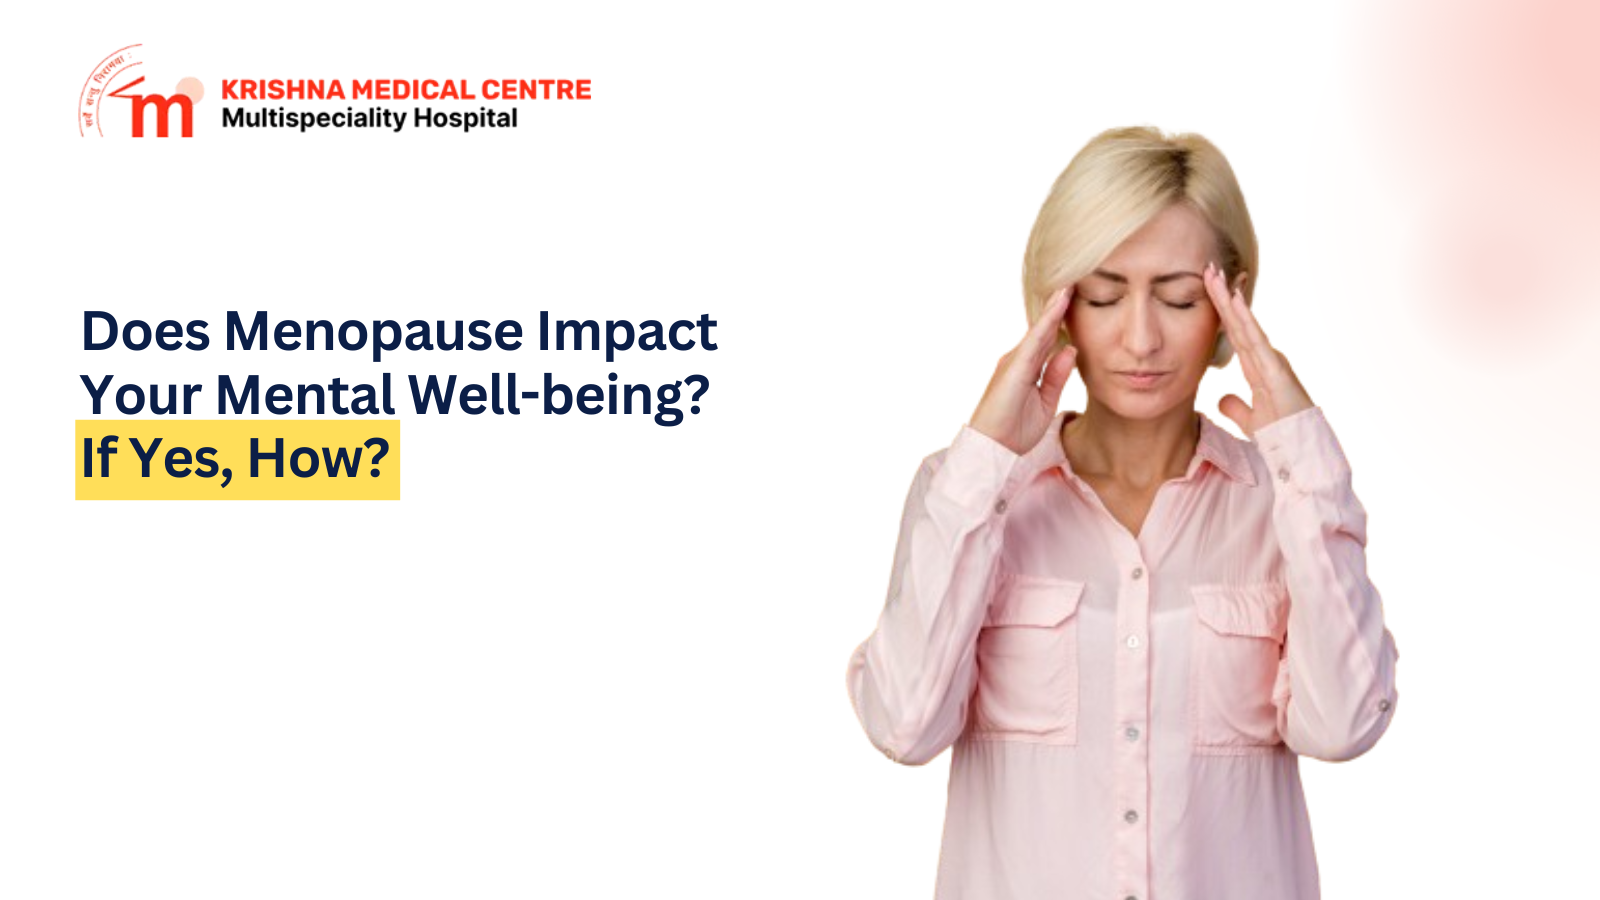 Does Menopause Impact Your Mental Well-being? If Yes, How?